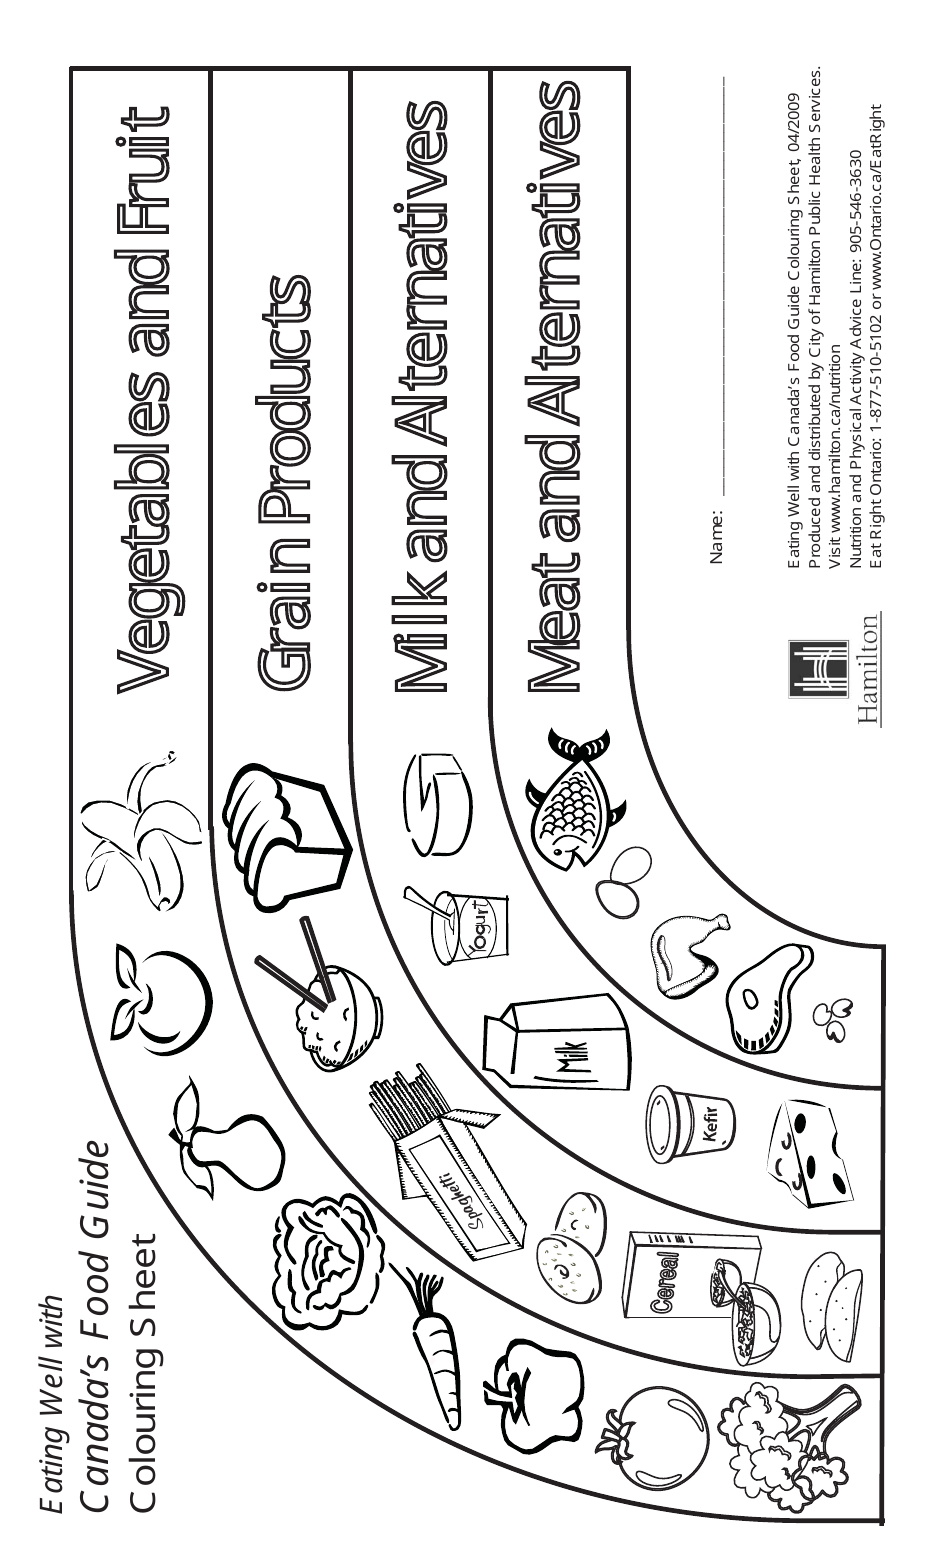 Coloring sheet depicting Canada's Food Guide